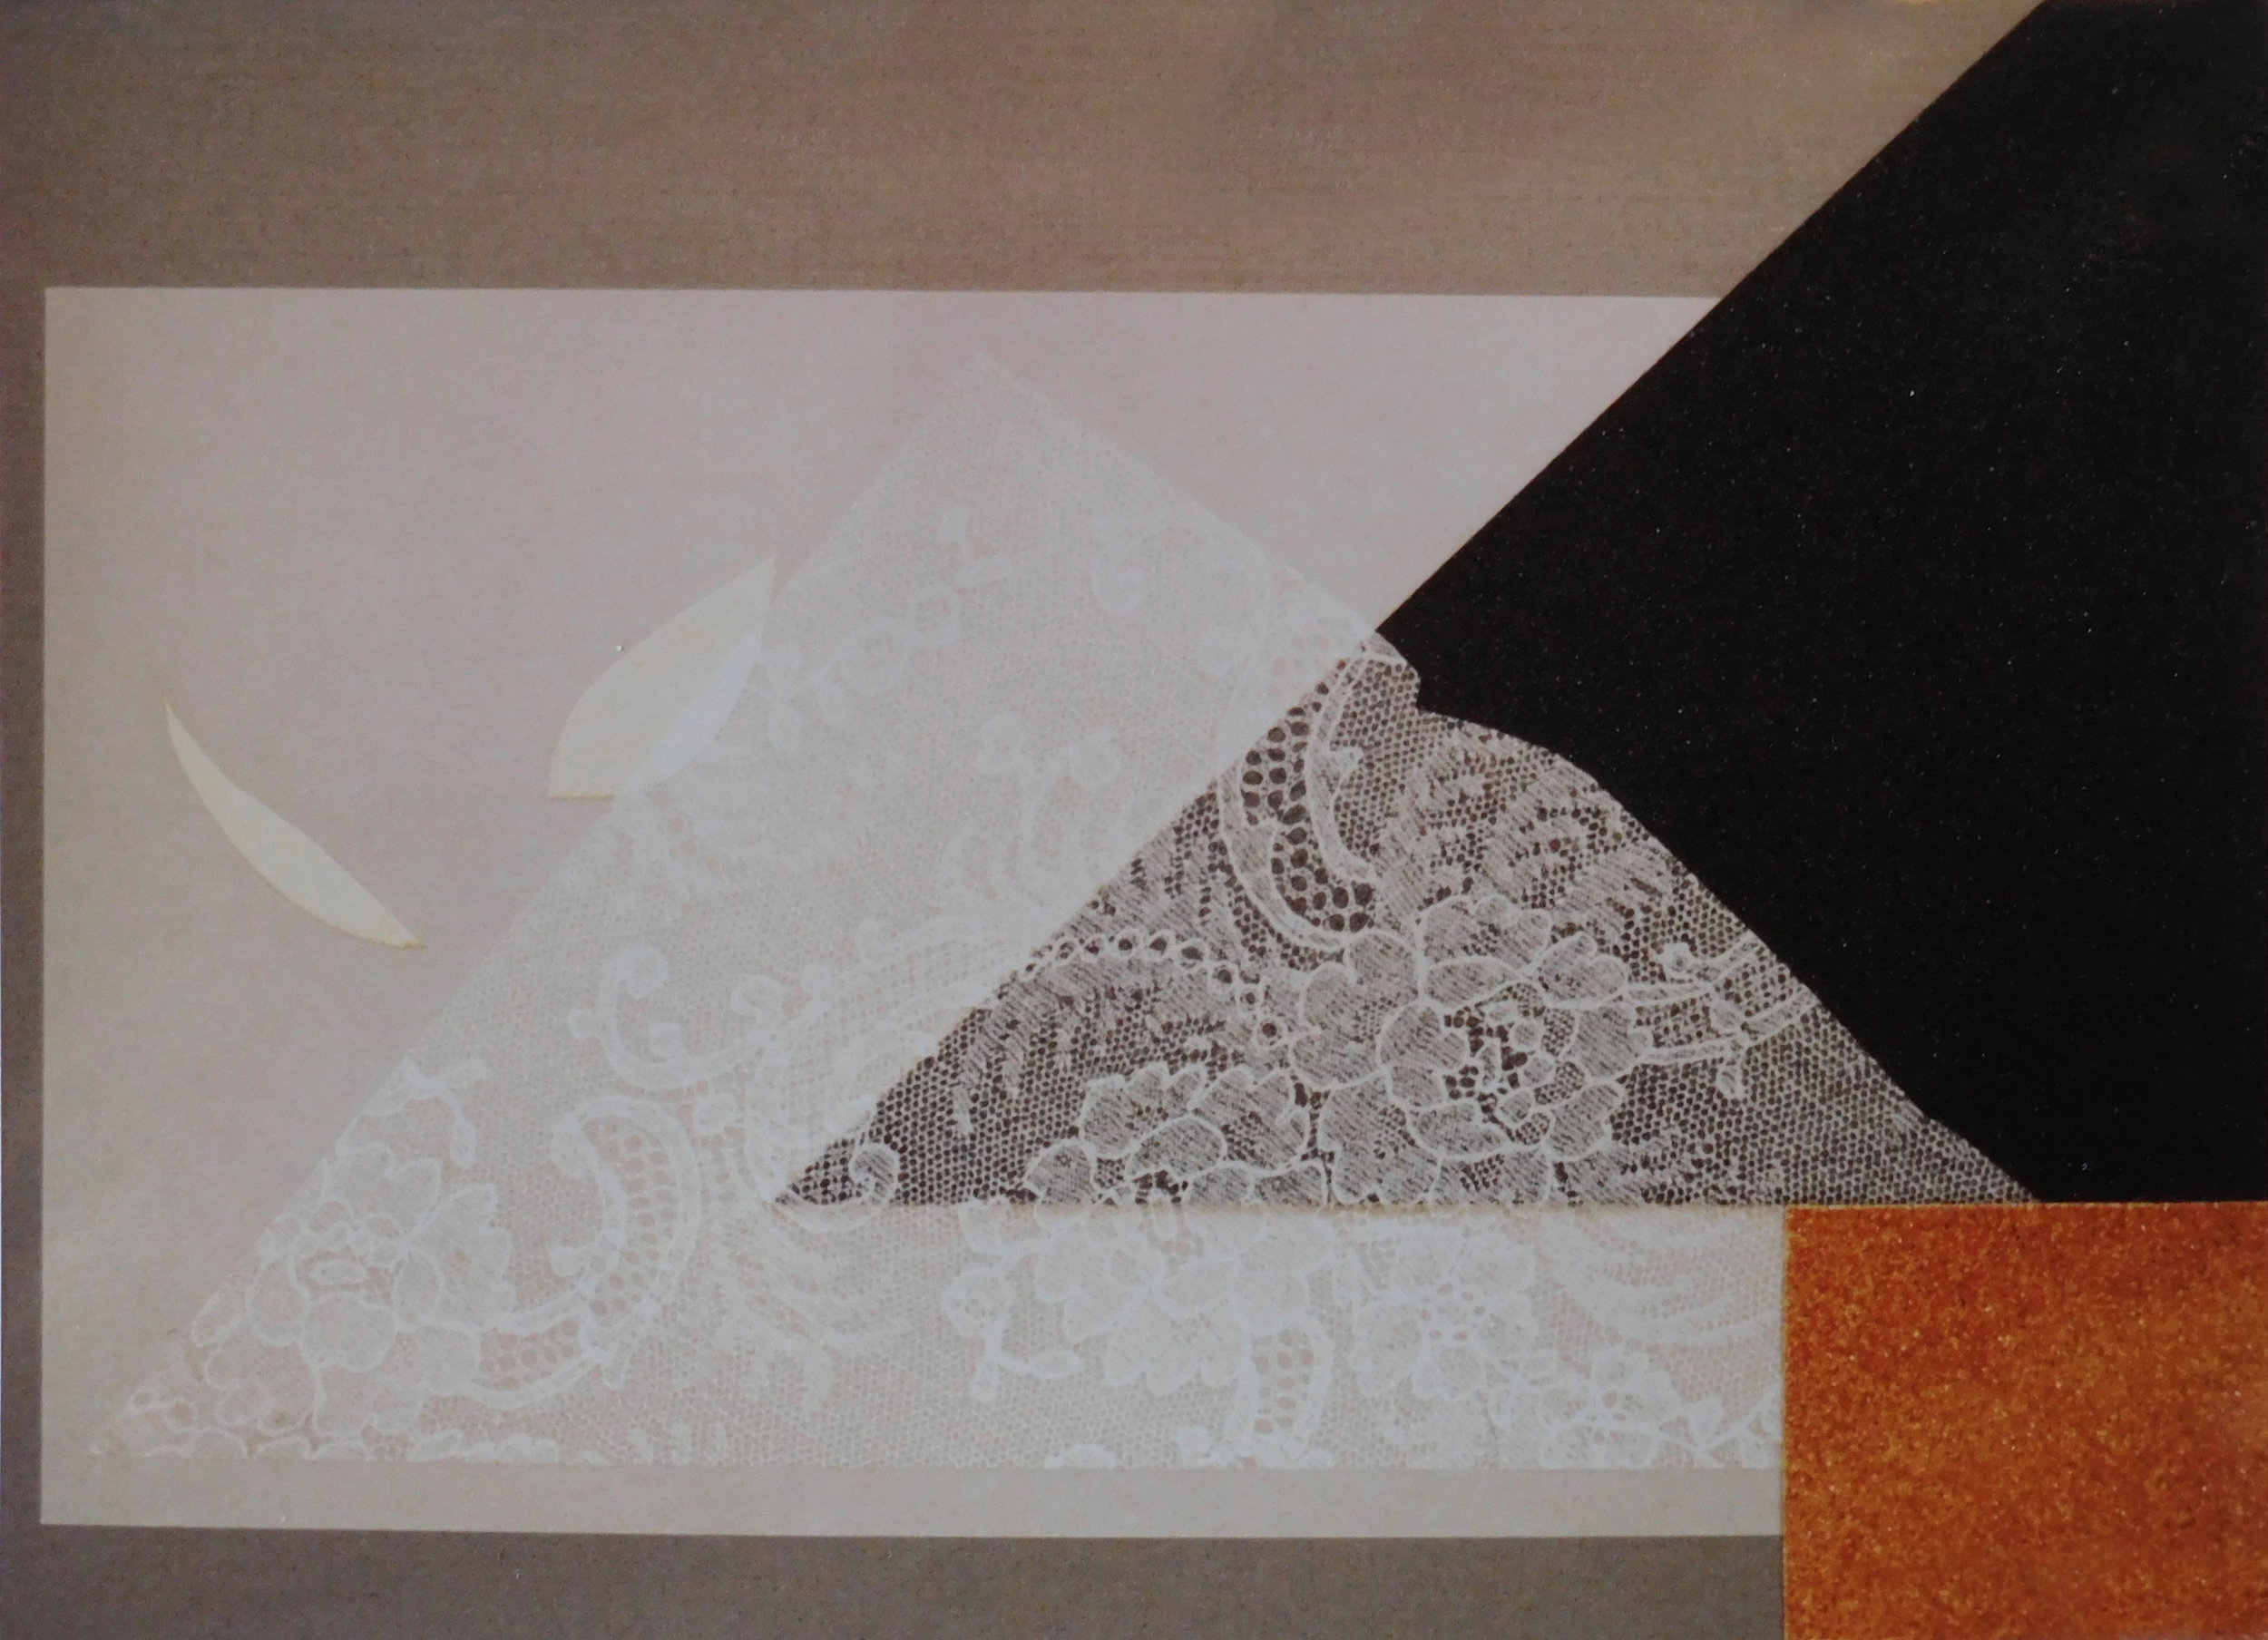 Abstract Image, 1990, Collage with Sandpaper, Lace and Foil, 16x20 inches with mat, Private Collection